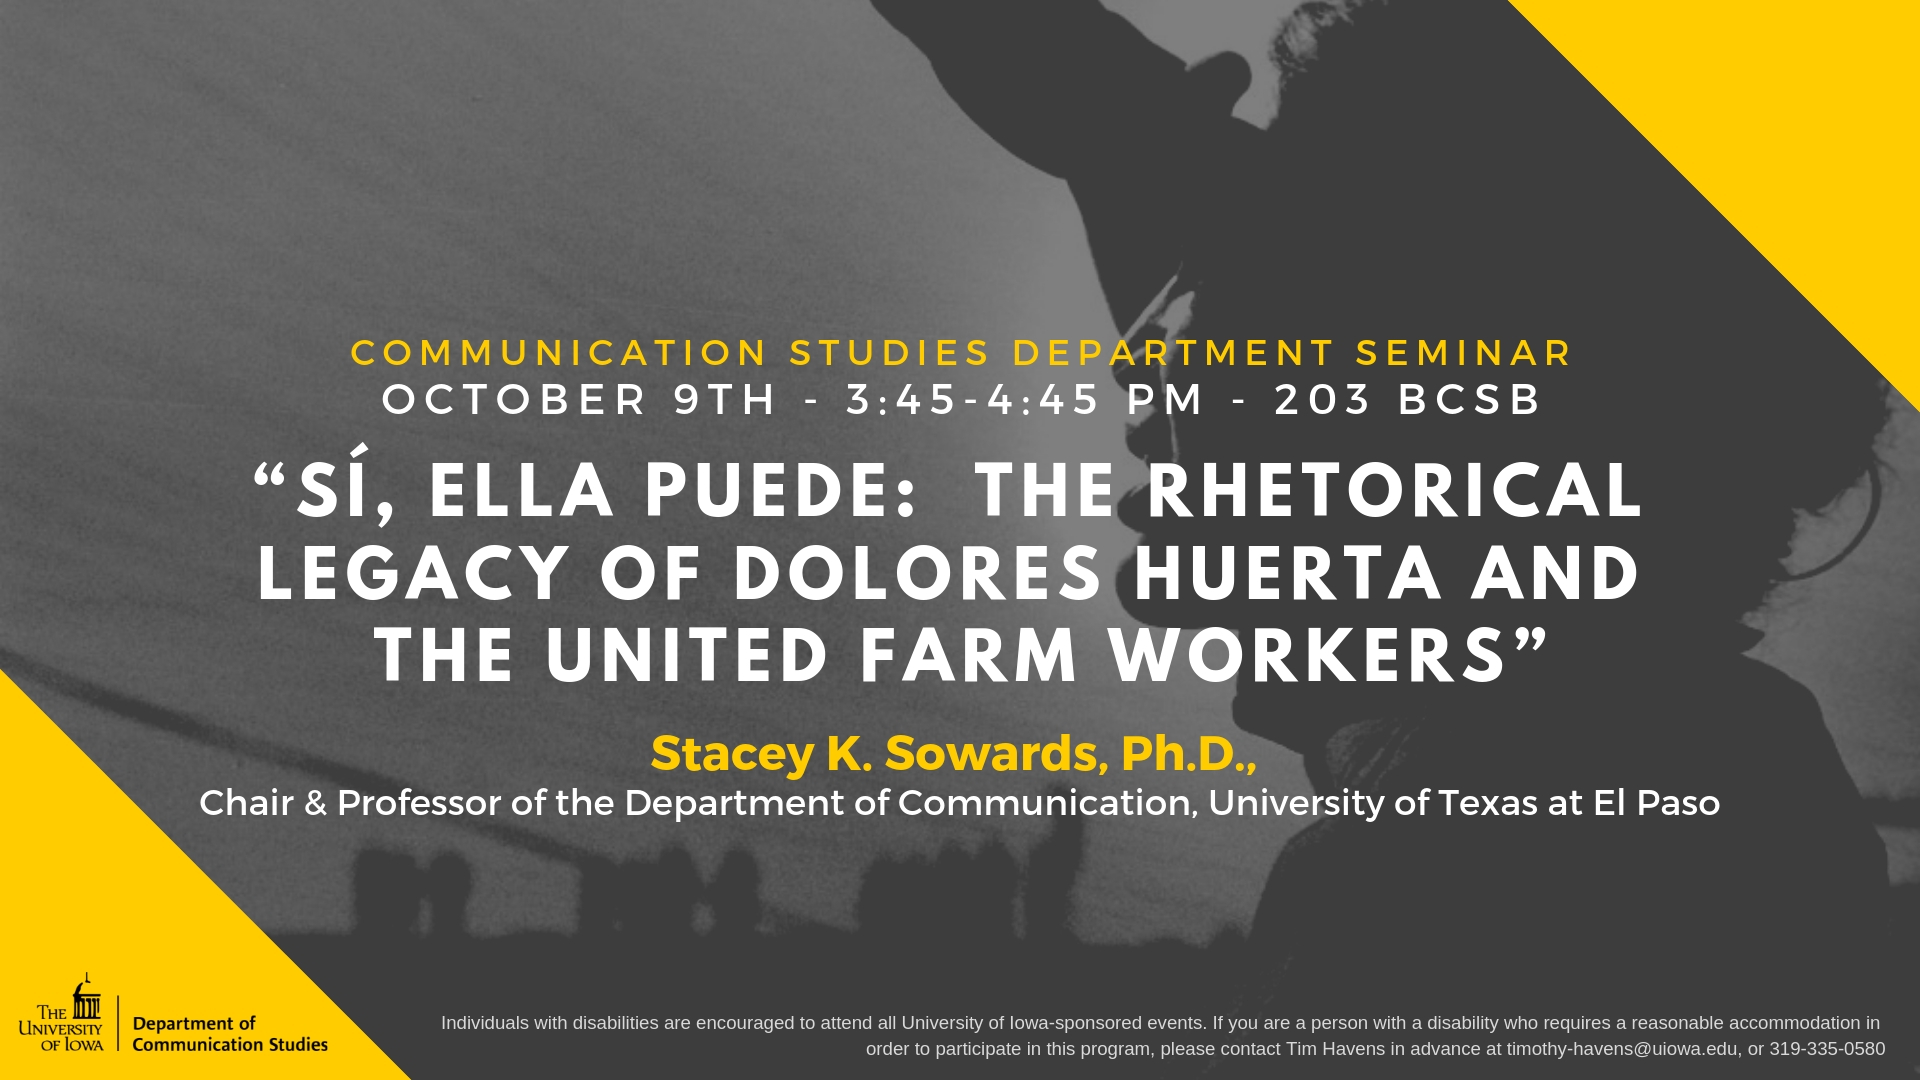 COMMUNICATION STUDIES DEPARTMENT SEMINAR: OCTOBER 9TH - 3:45-4:45 PM - 203 BCSB: “SÍ, ELLA PUEDE:  THE RHETORICAL LEGACY OF DOLORES HUERTA AND THE UNITED FARM WORKERS” - Stacey K. Sowards, Ph.D., Chair & Professor of the Department of Communication, University of Texas at El Paso